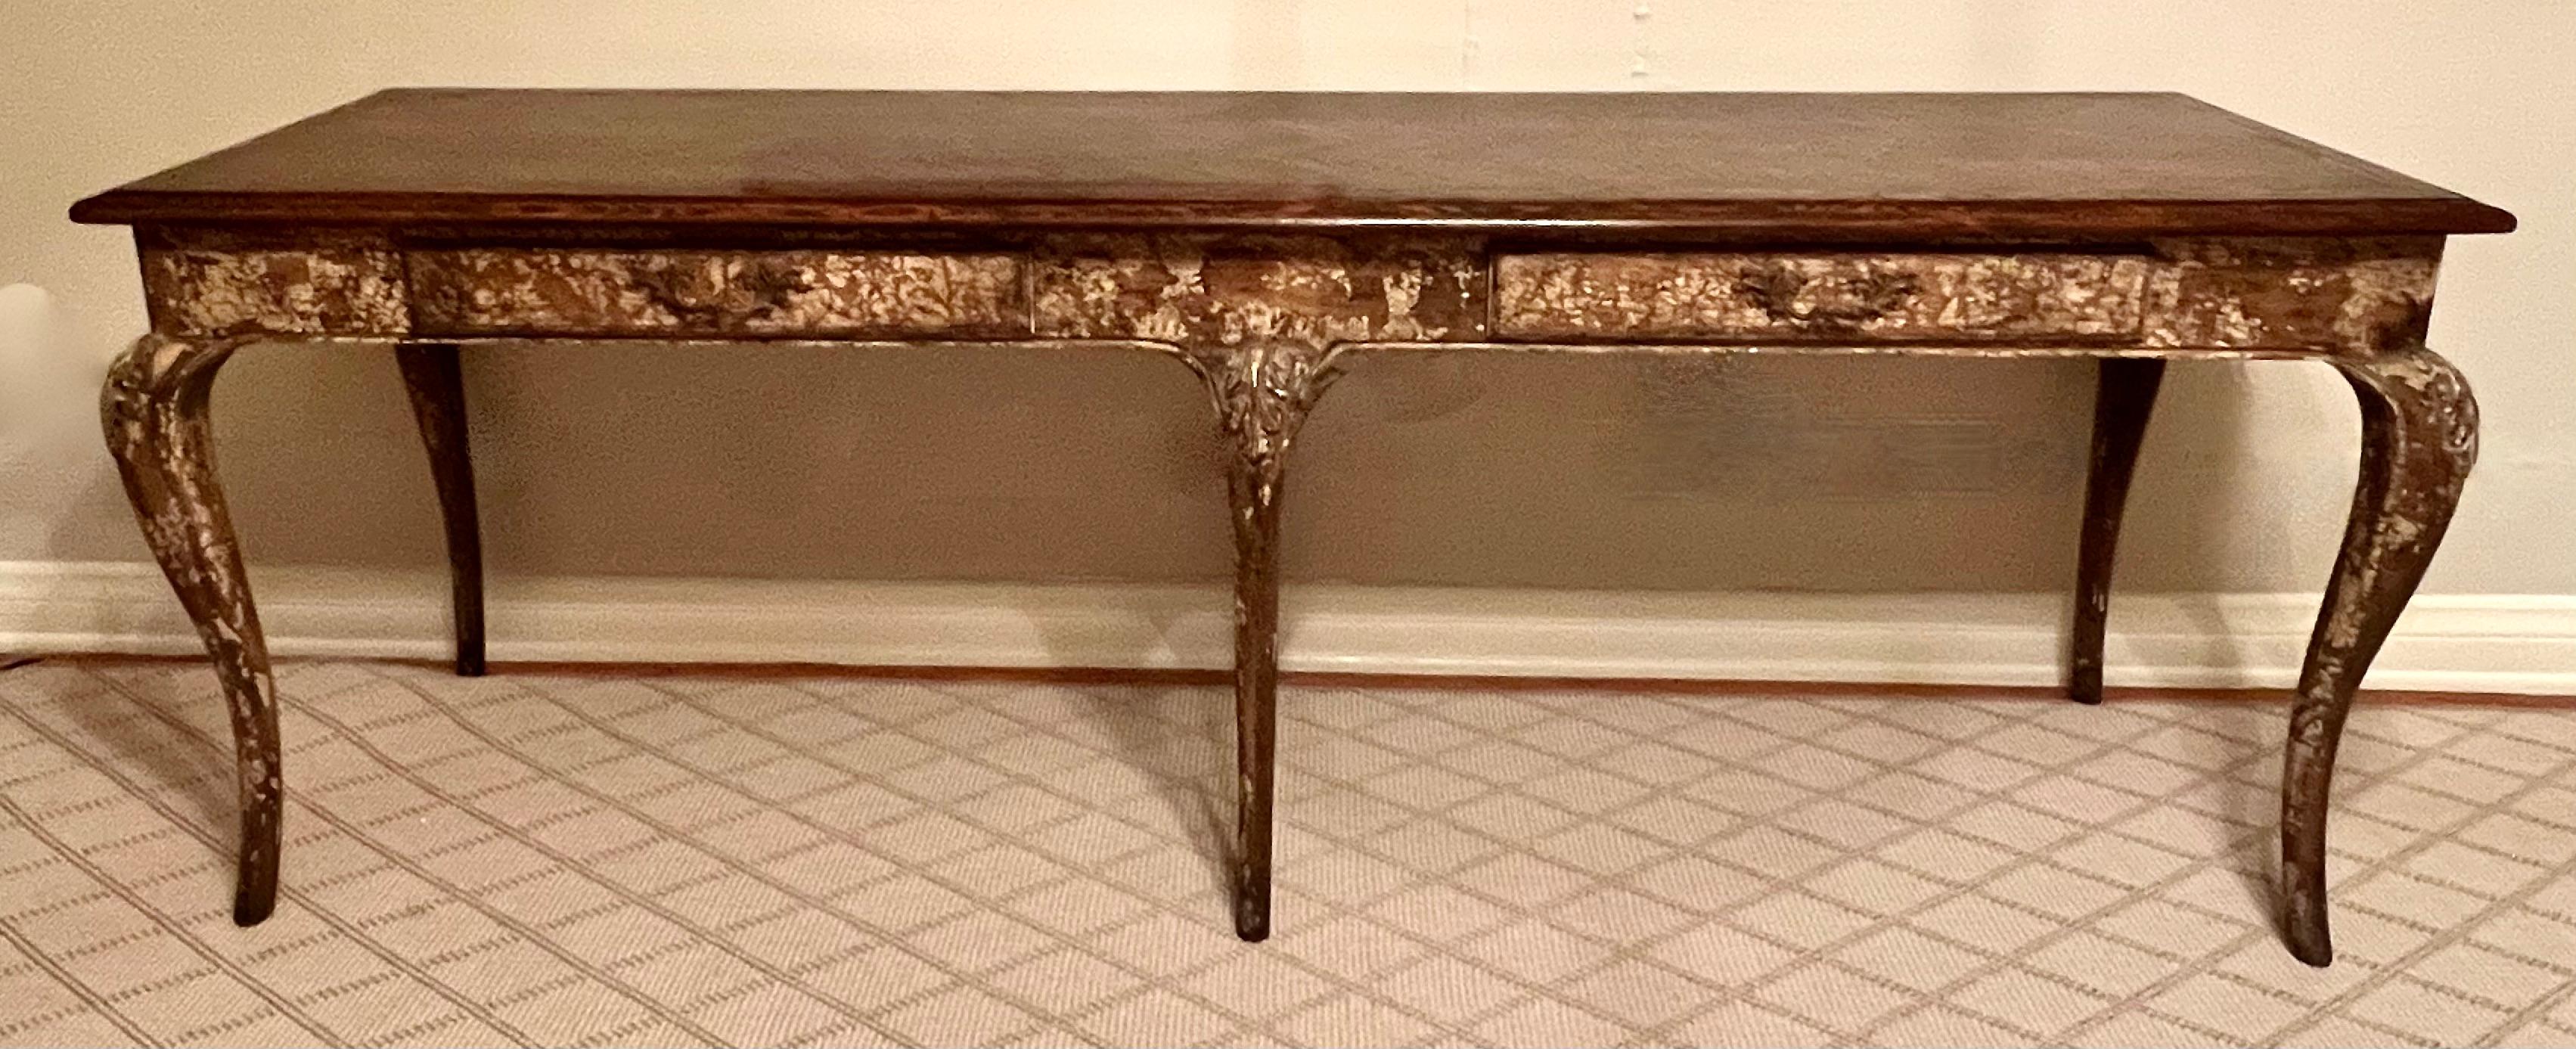 Parquetry Louis XV Style Patinated Console or Sofa Table Parquet Herringbone Top For Sale